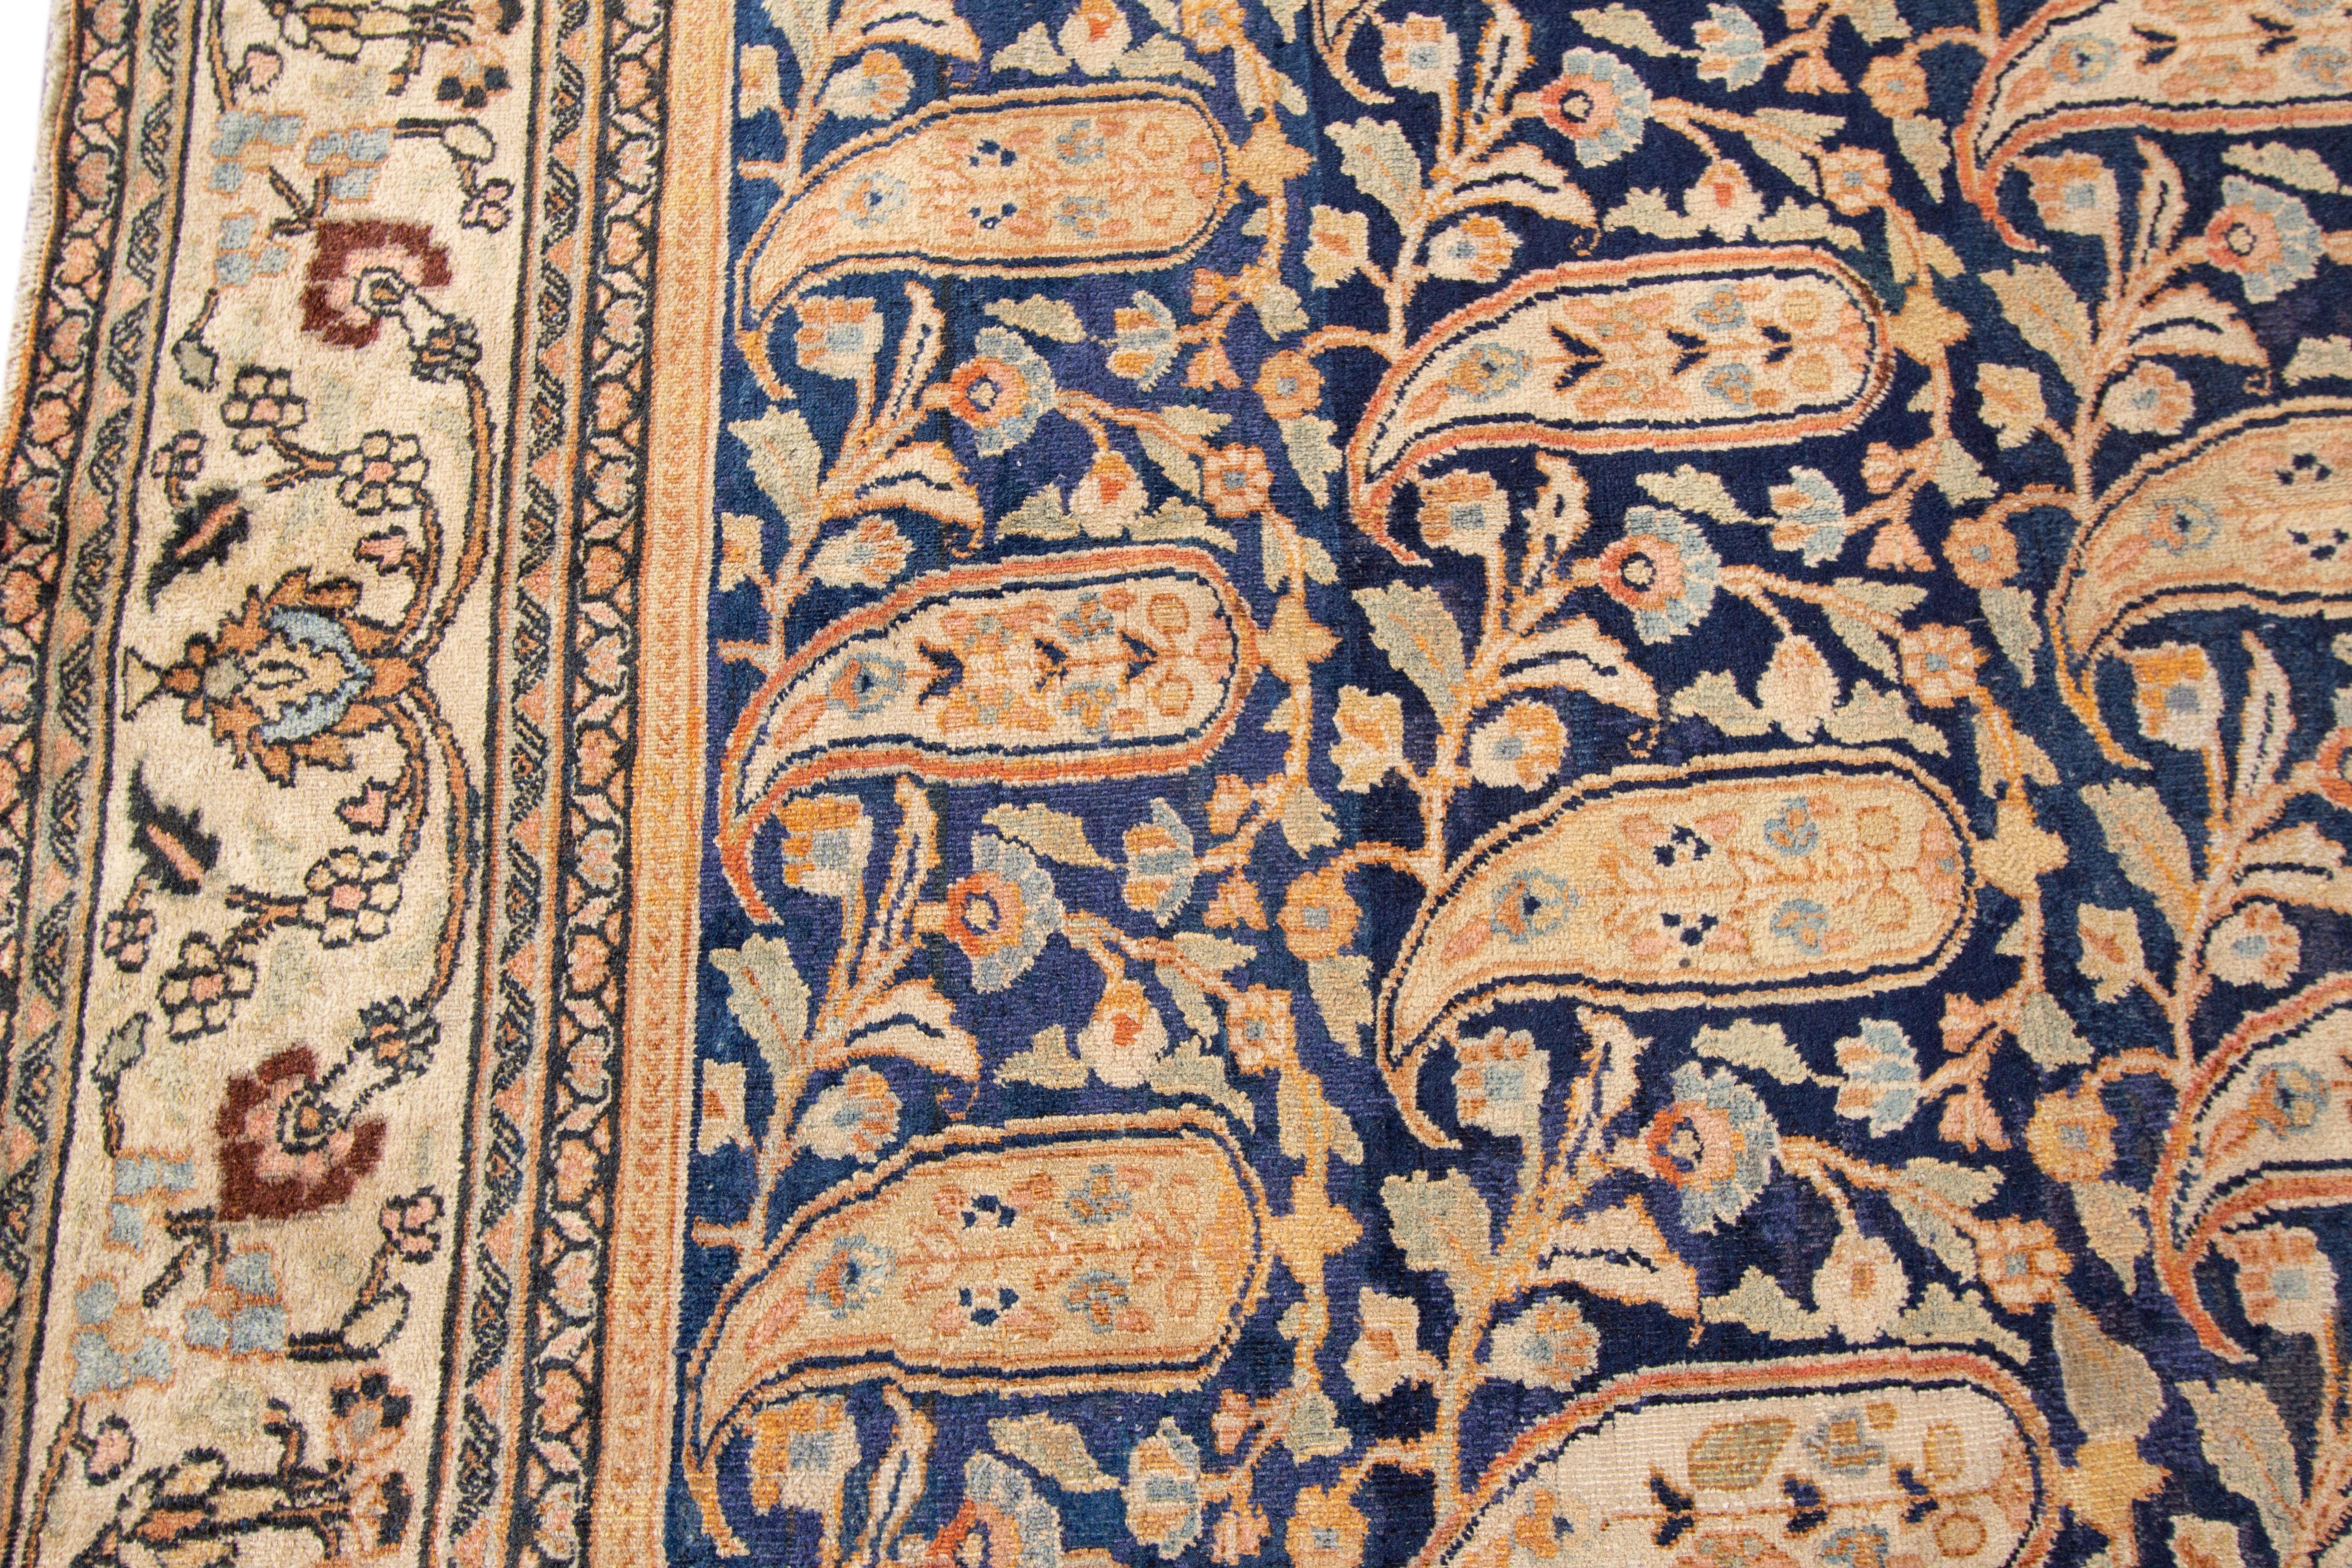 Antique Mashad Runner Rug In Good Condition For Sale In Norwalk, CT